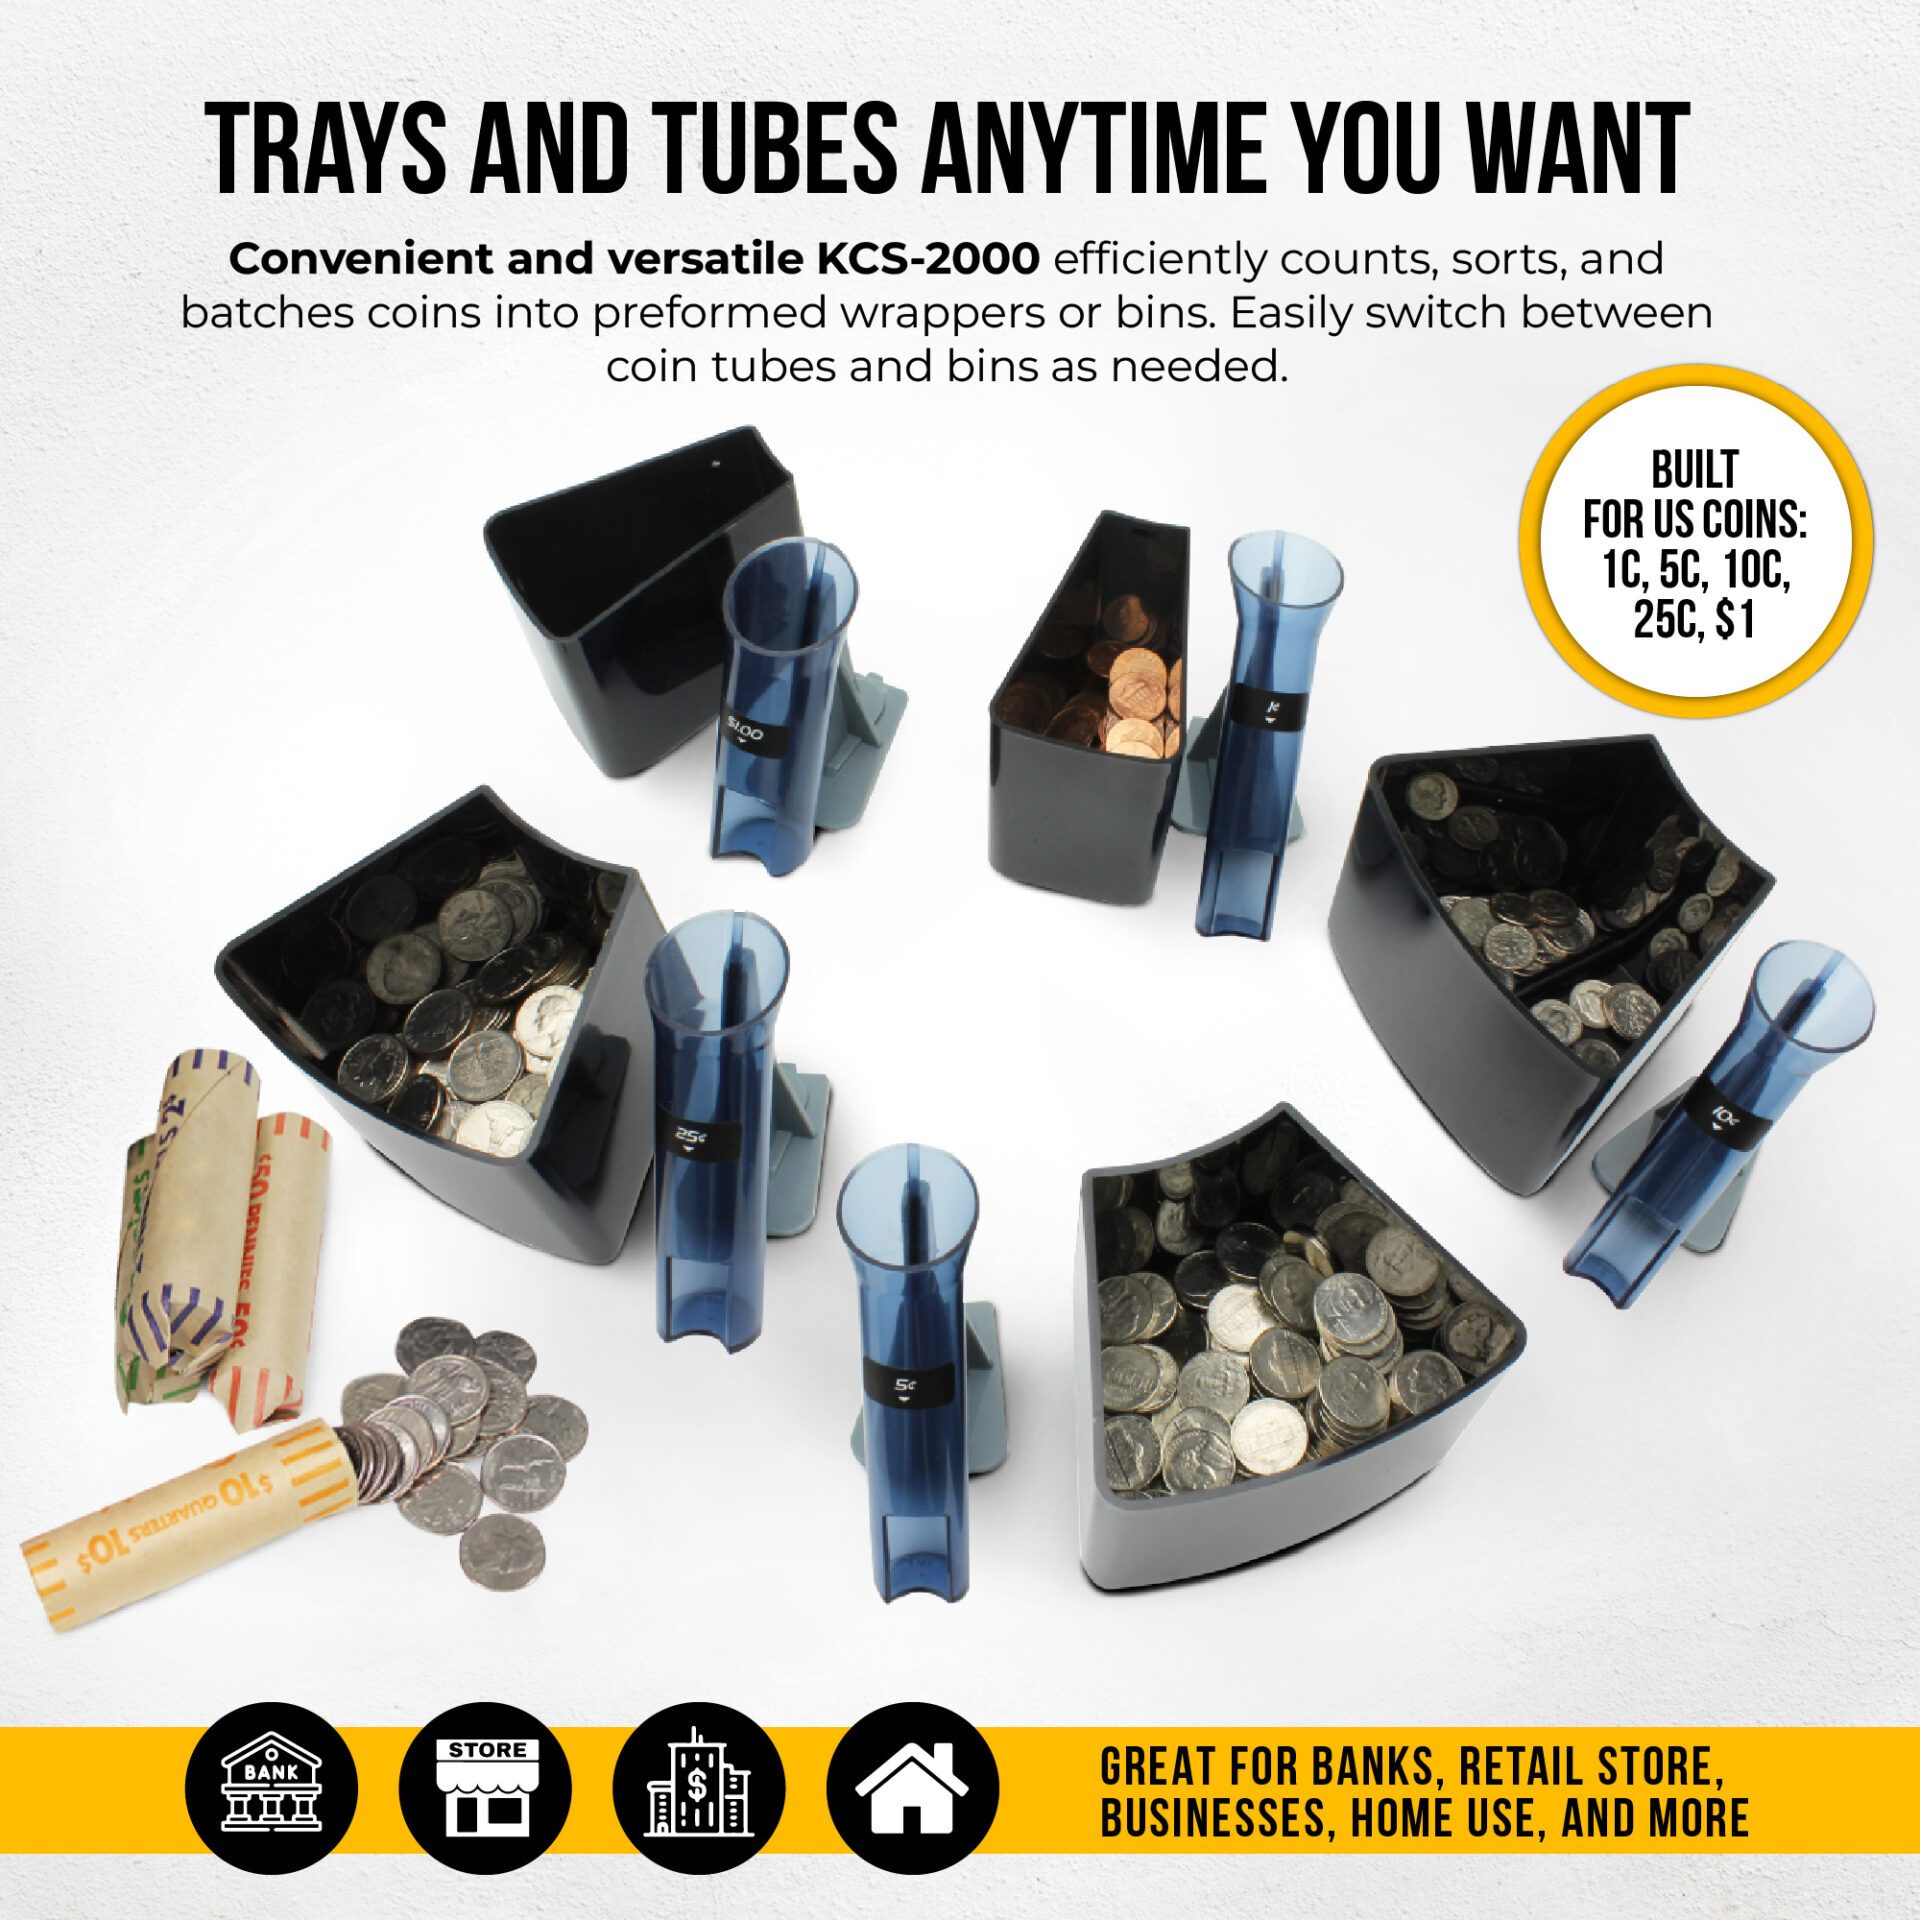 Trays and Tubes Anytime You Want